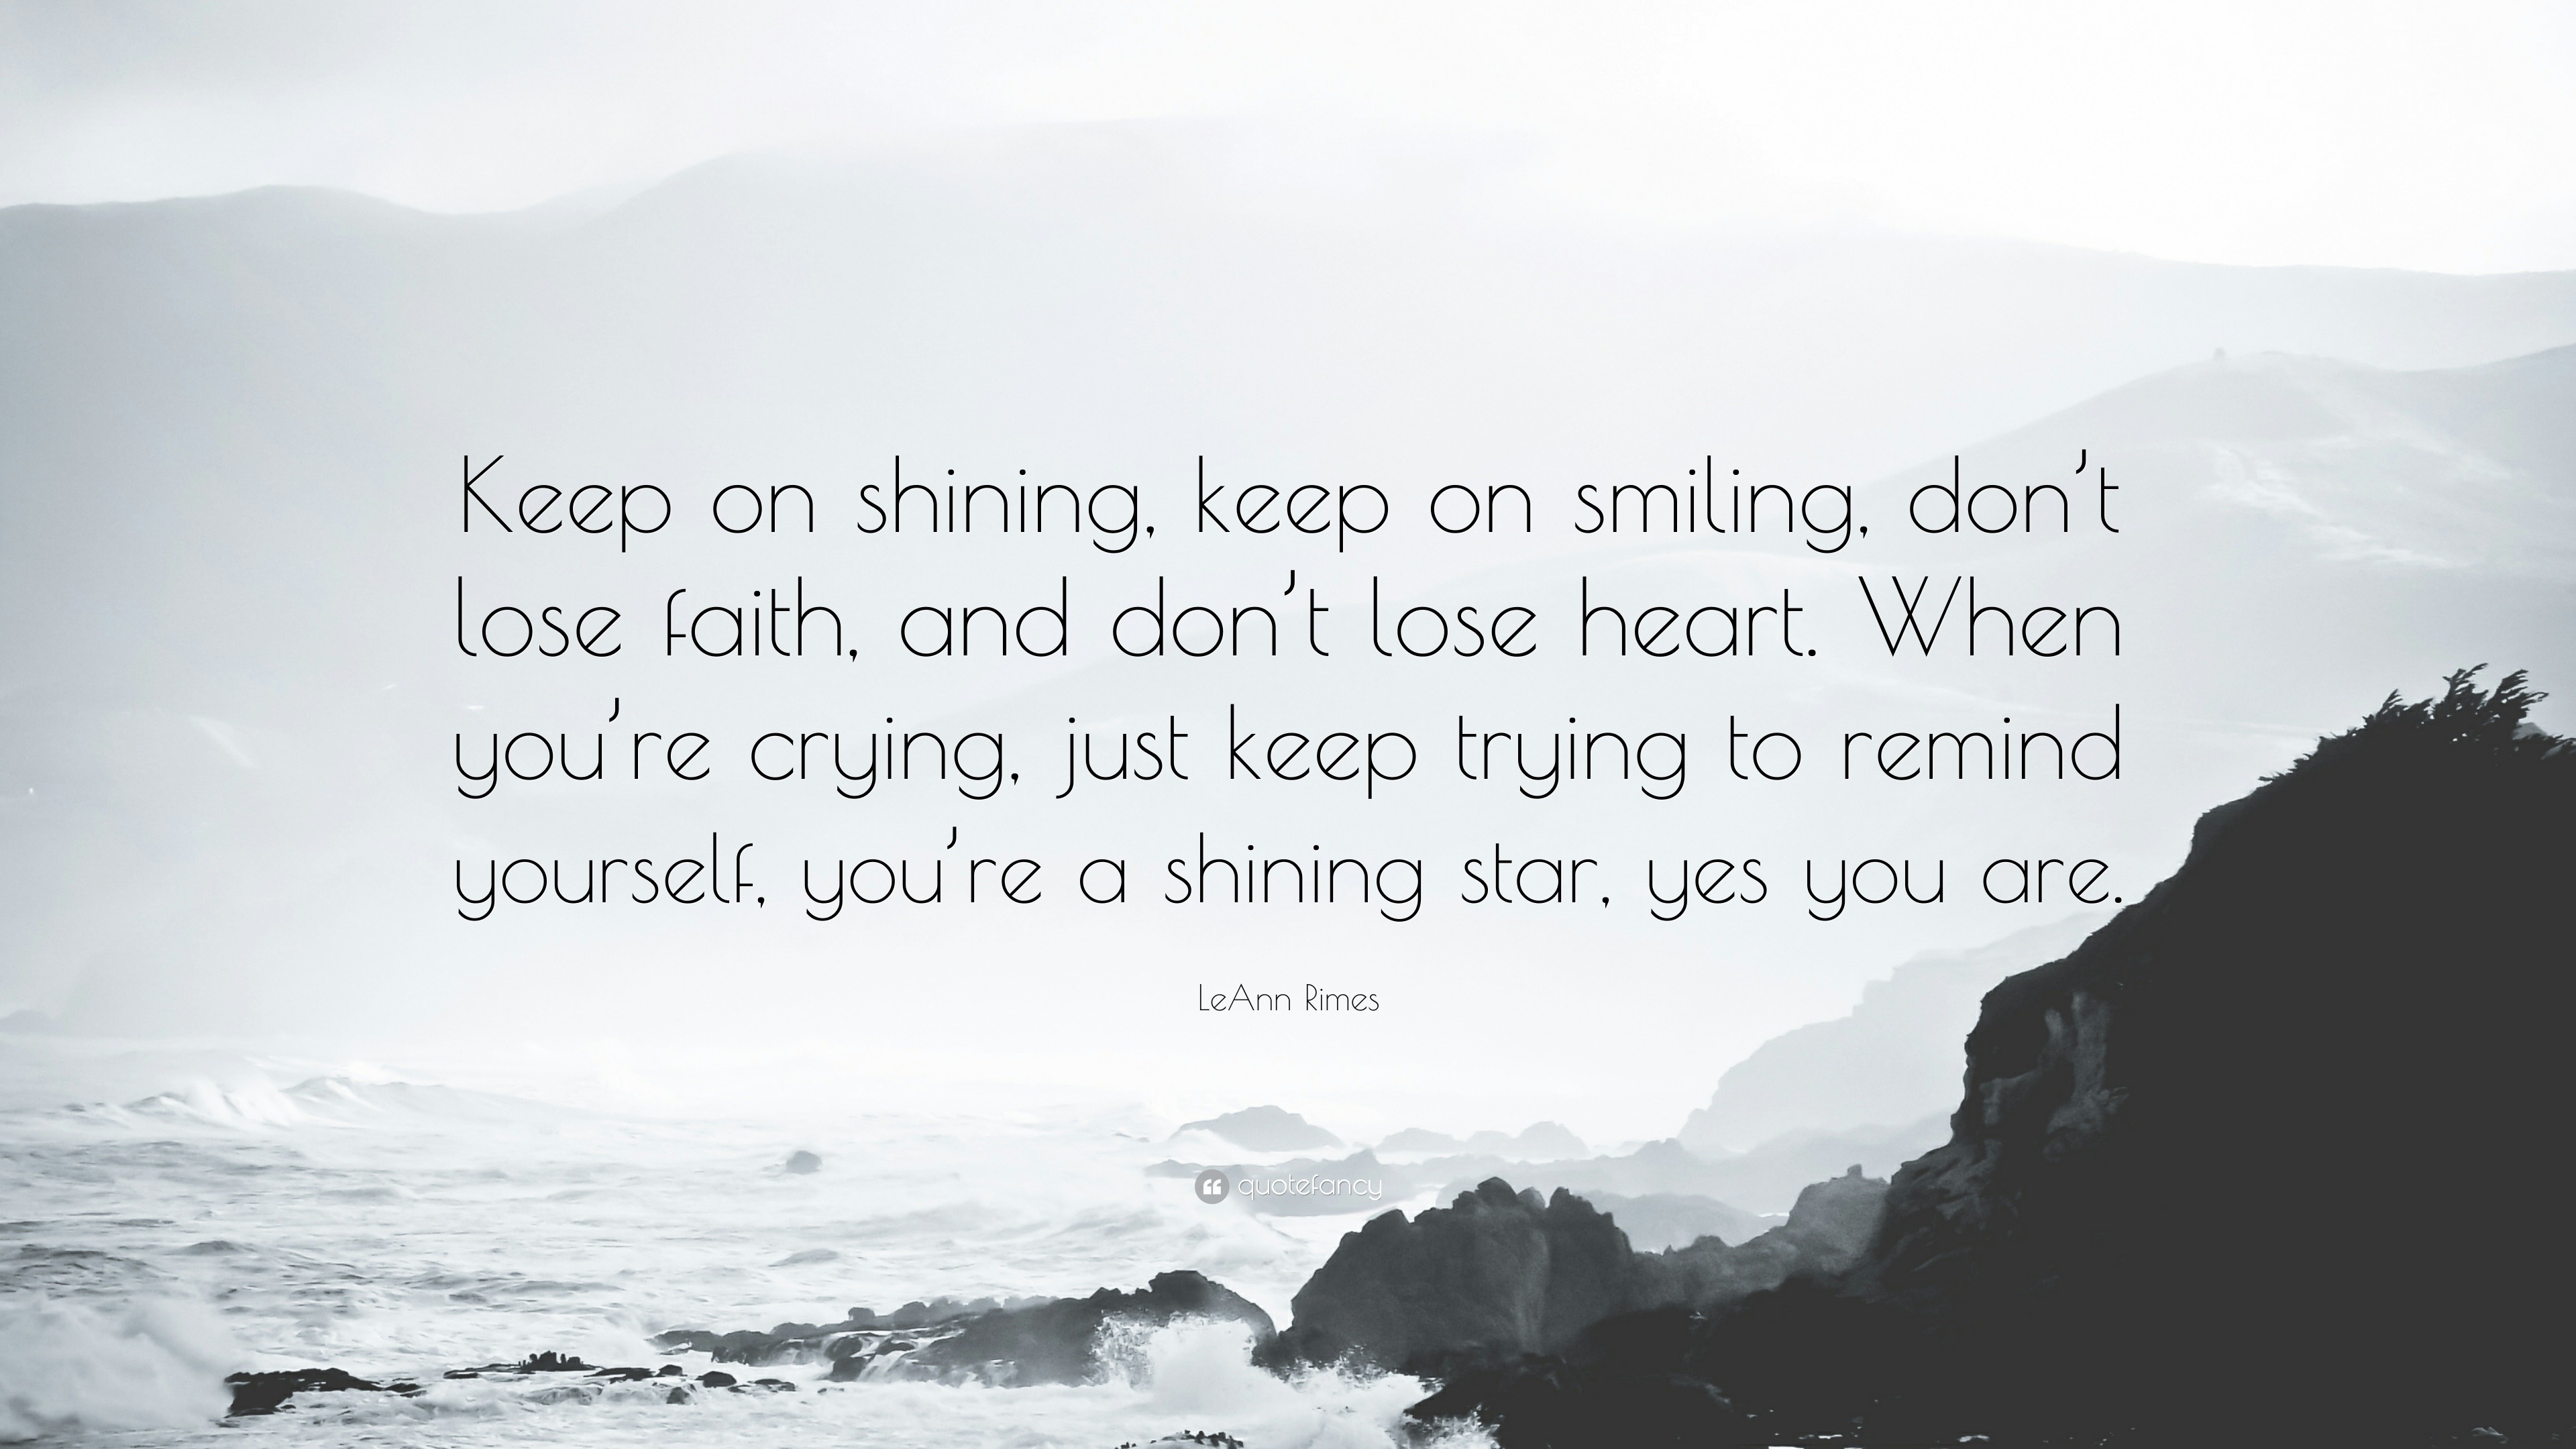 Leann Rimes Quote Keep On Shining Keep On Smiling Don T Lose Faith And Don T Lose Heart When You Re Crying Just Keep Trying To Remind 7 Wallpapers Quotefancy